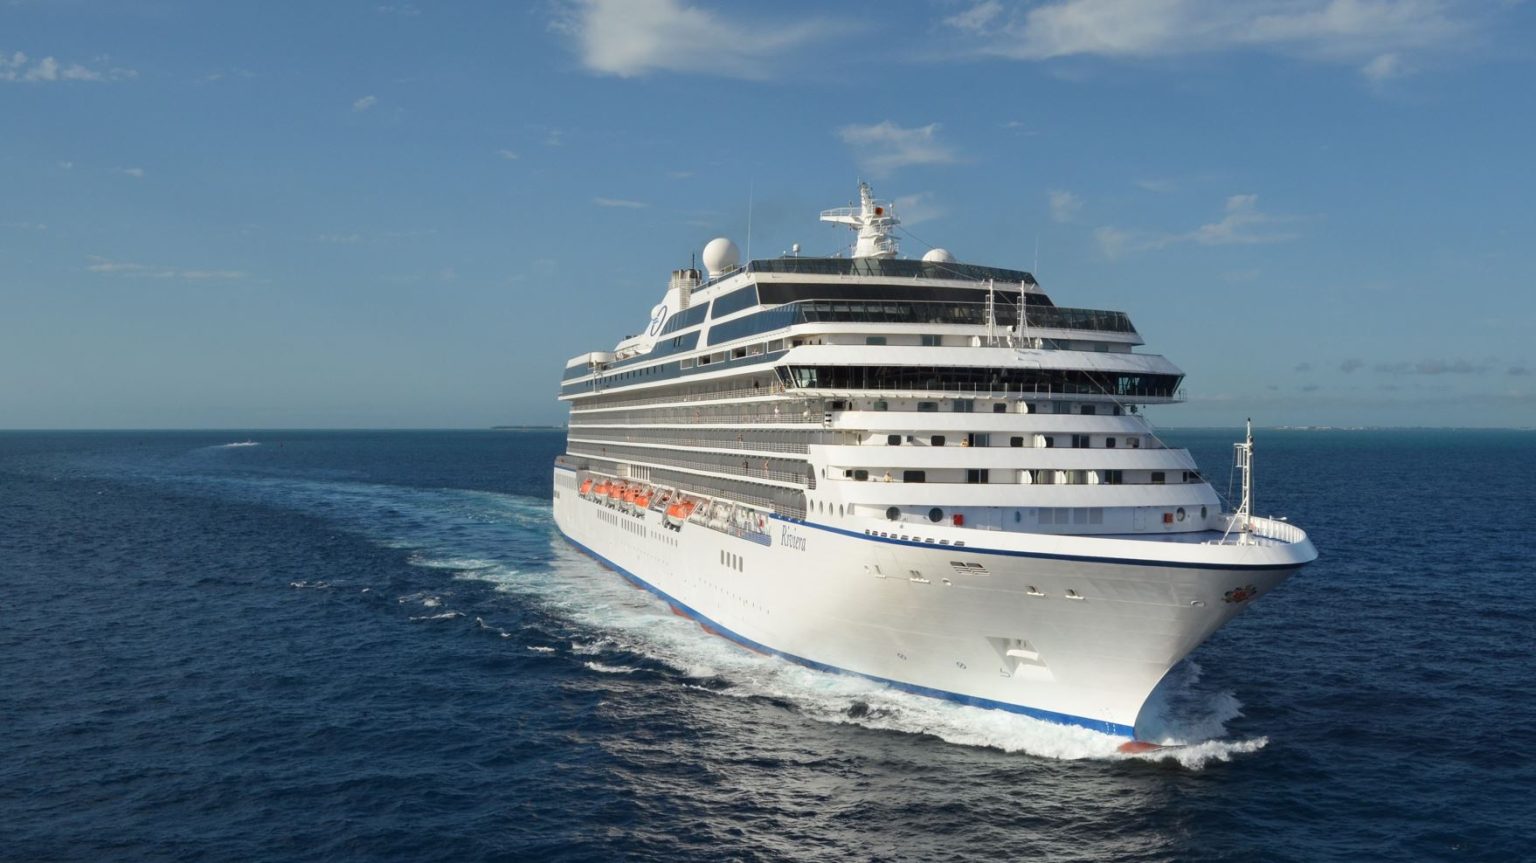 First look at the betterthannew Oceania Riviera CruiseToTravel